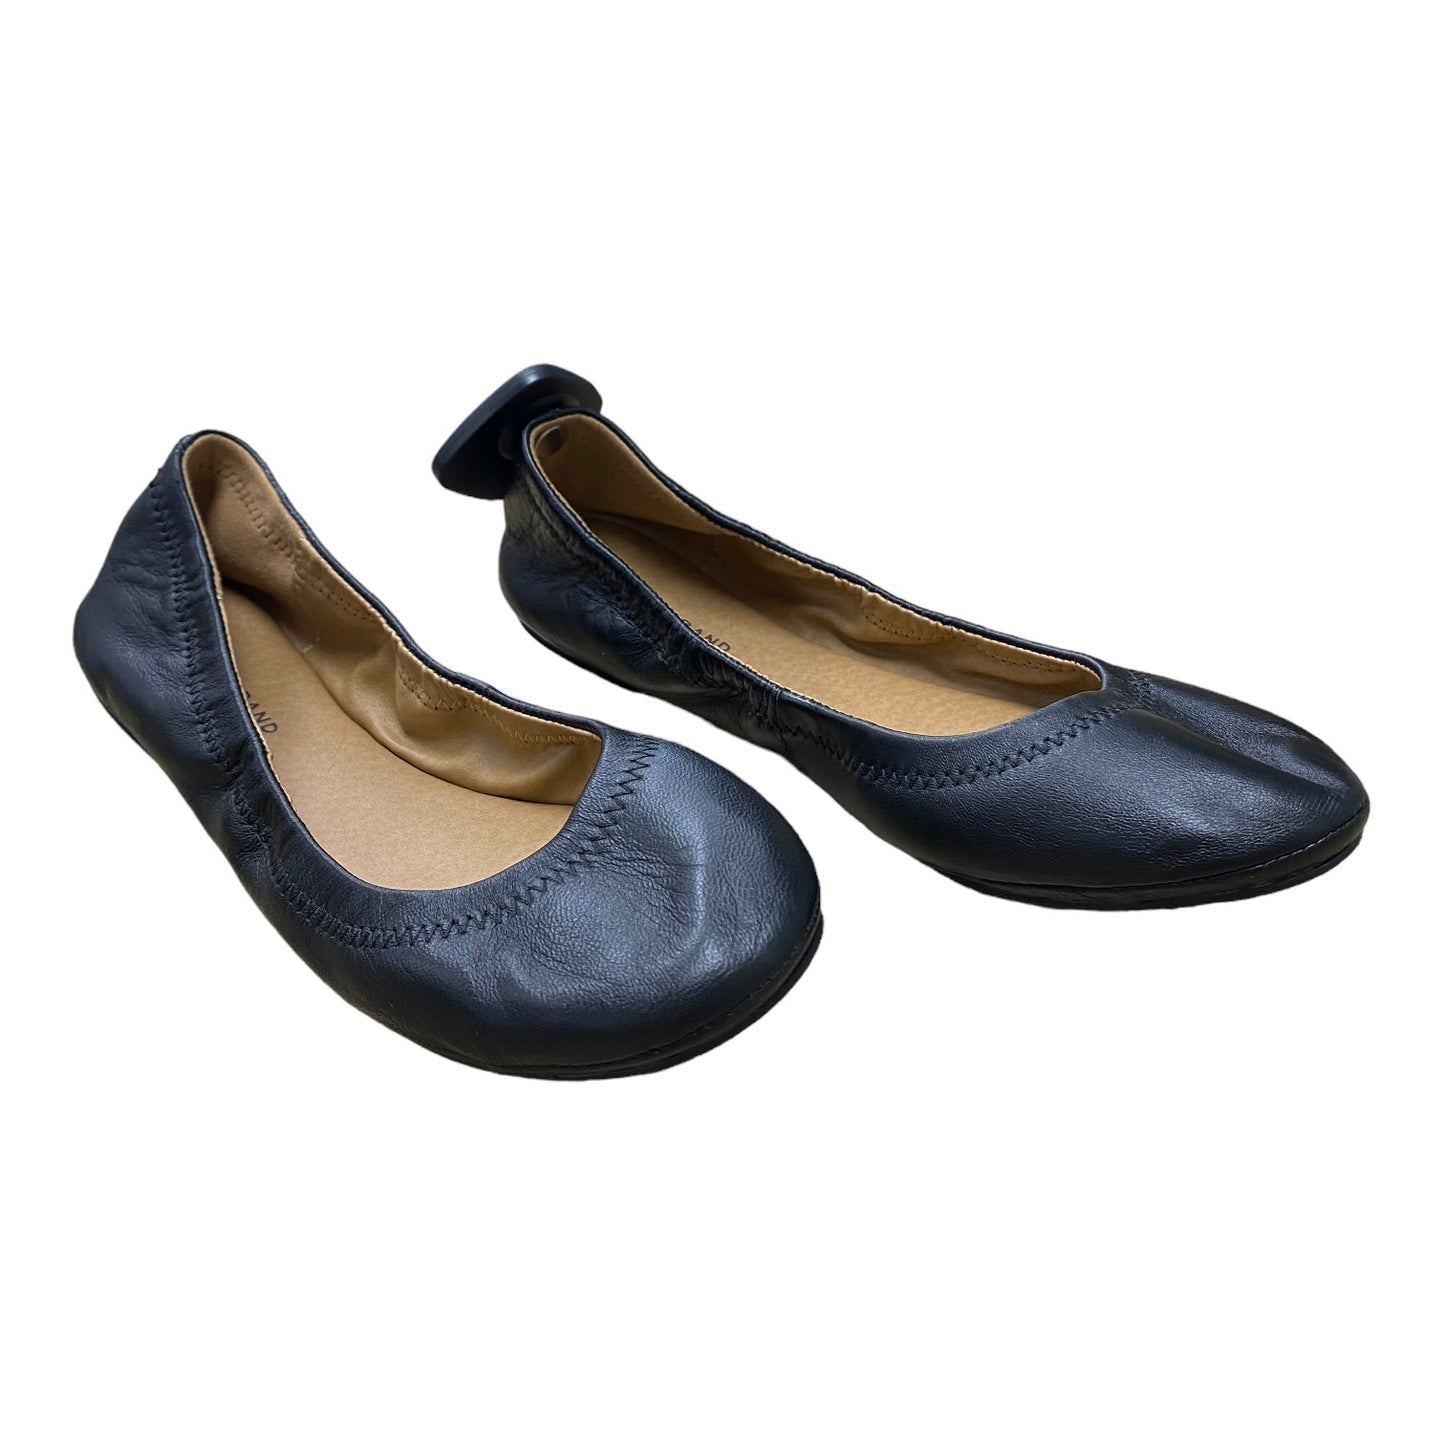 Black Shoes Flats Lucky Brand, Size 7.5